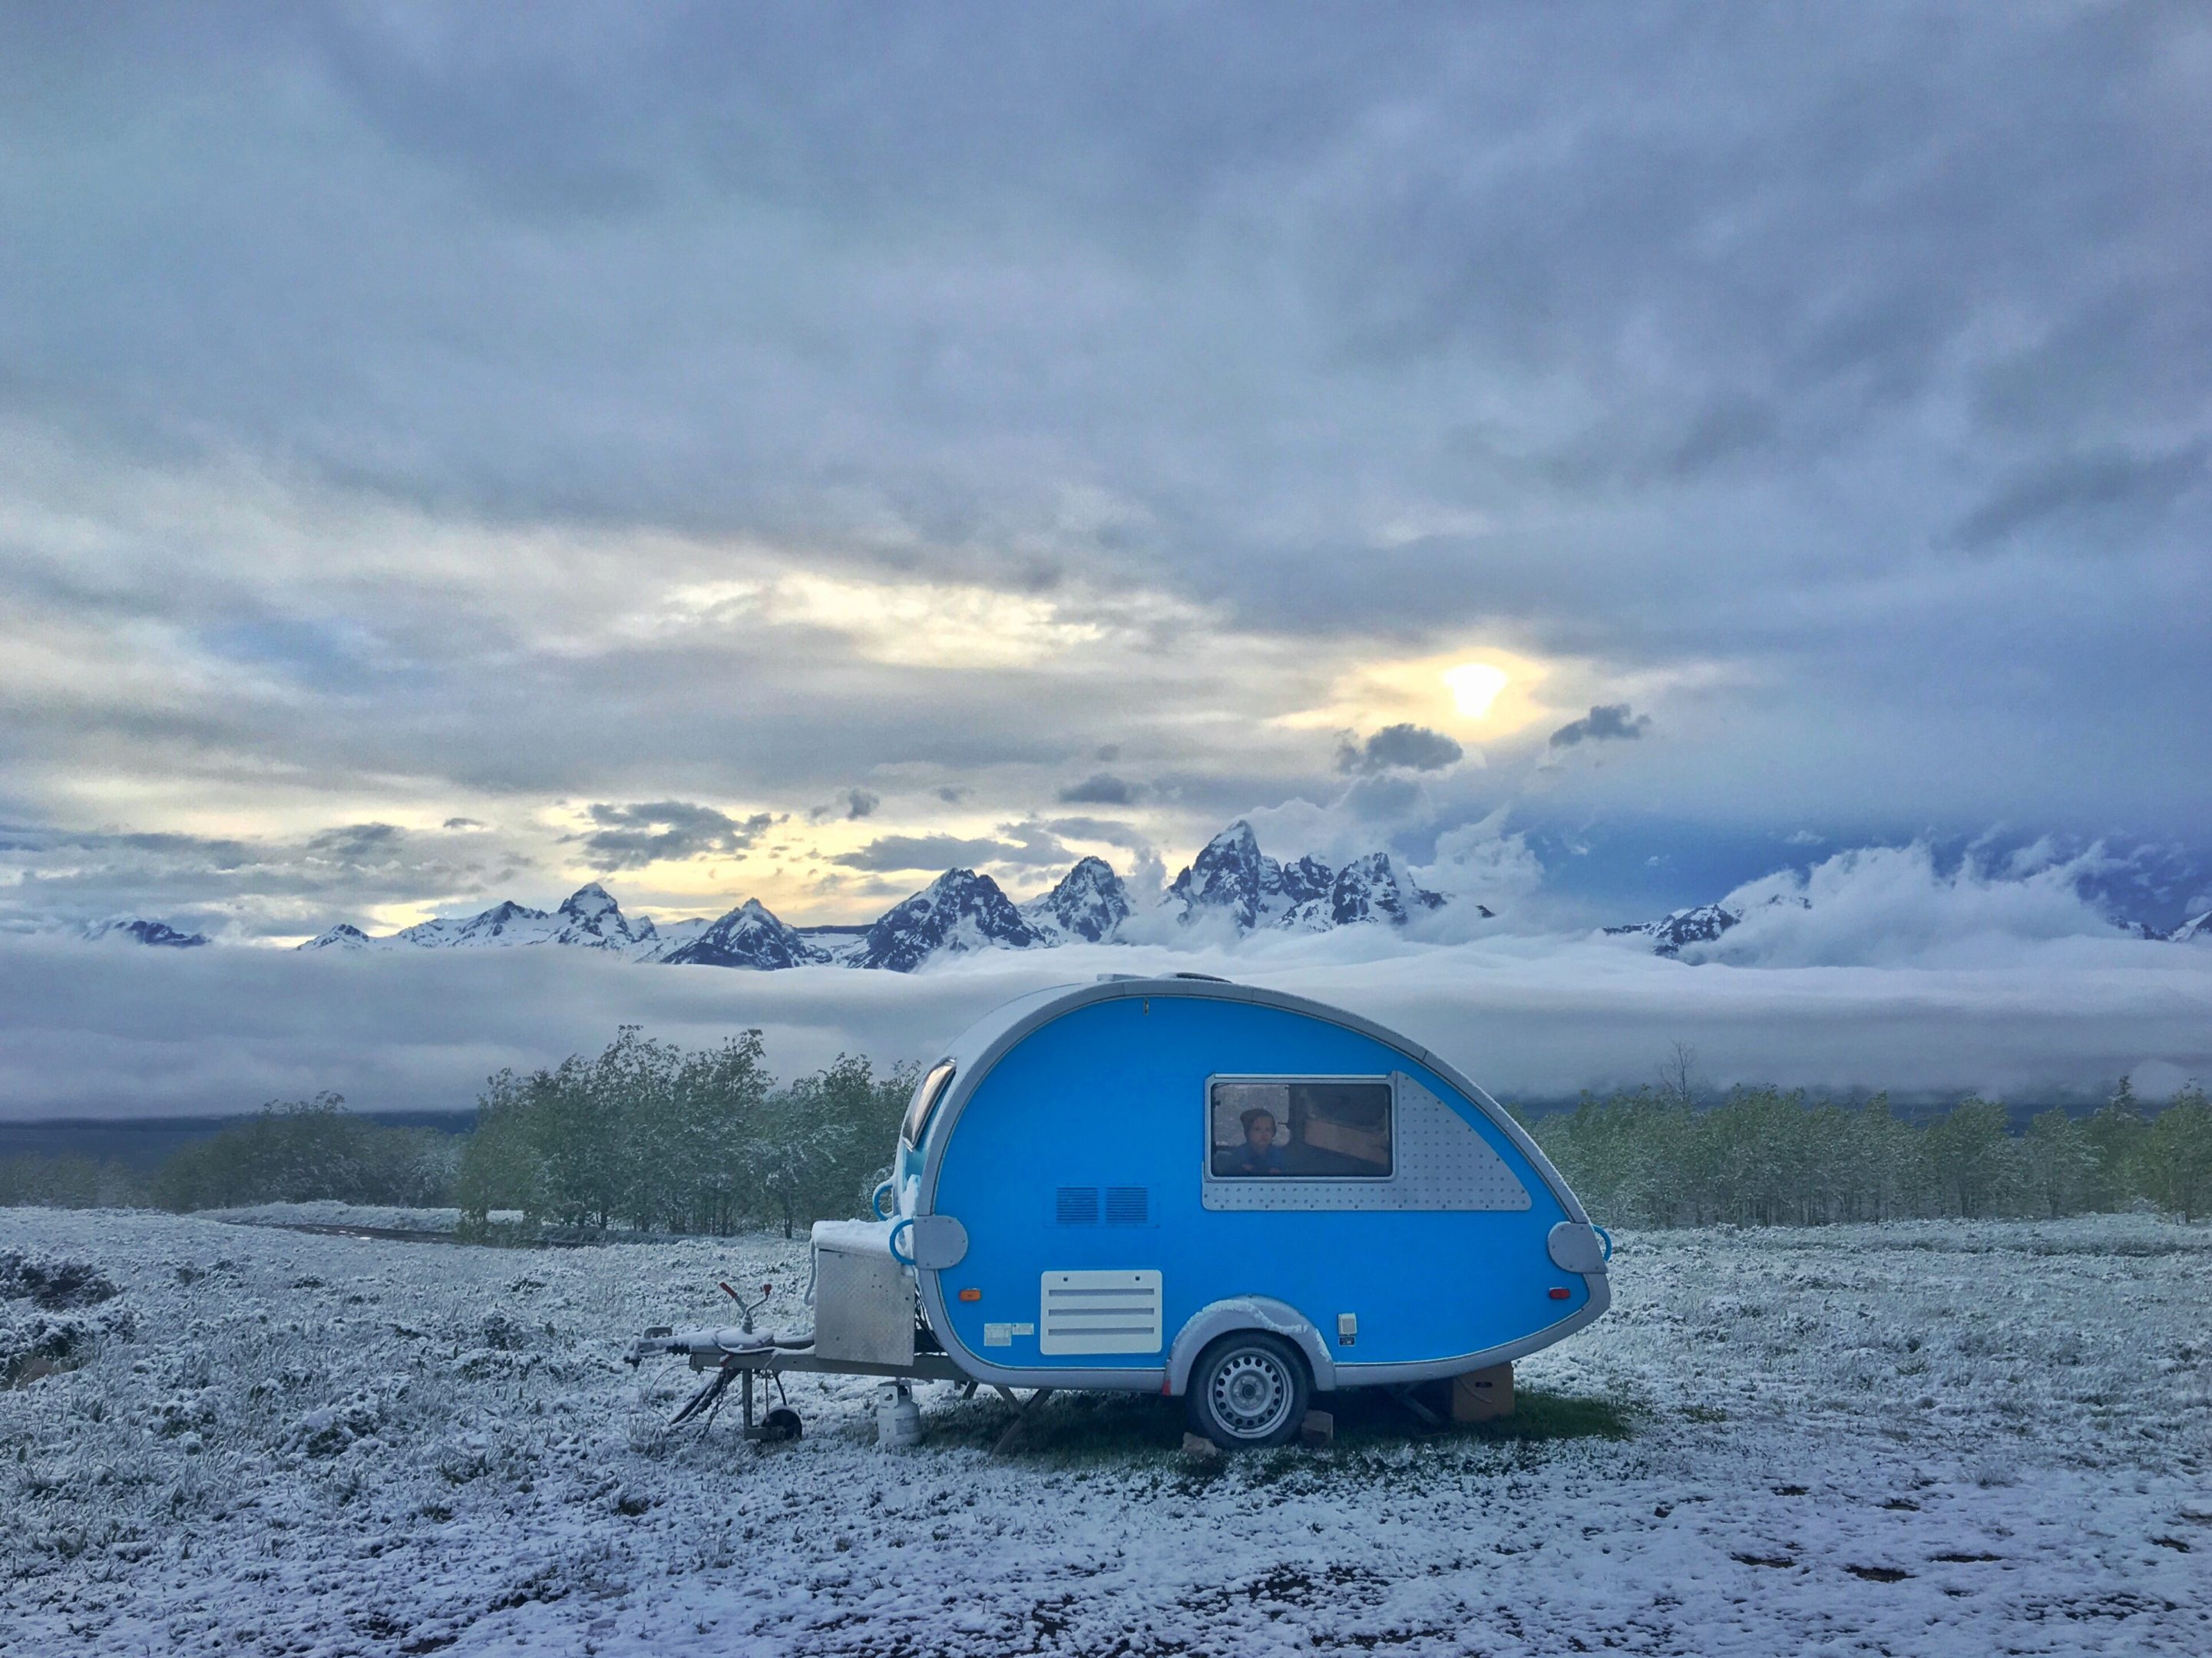 One Of My Favorite Photography Accessories: A Cozy Camper Trailer